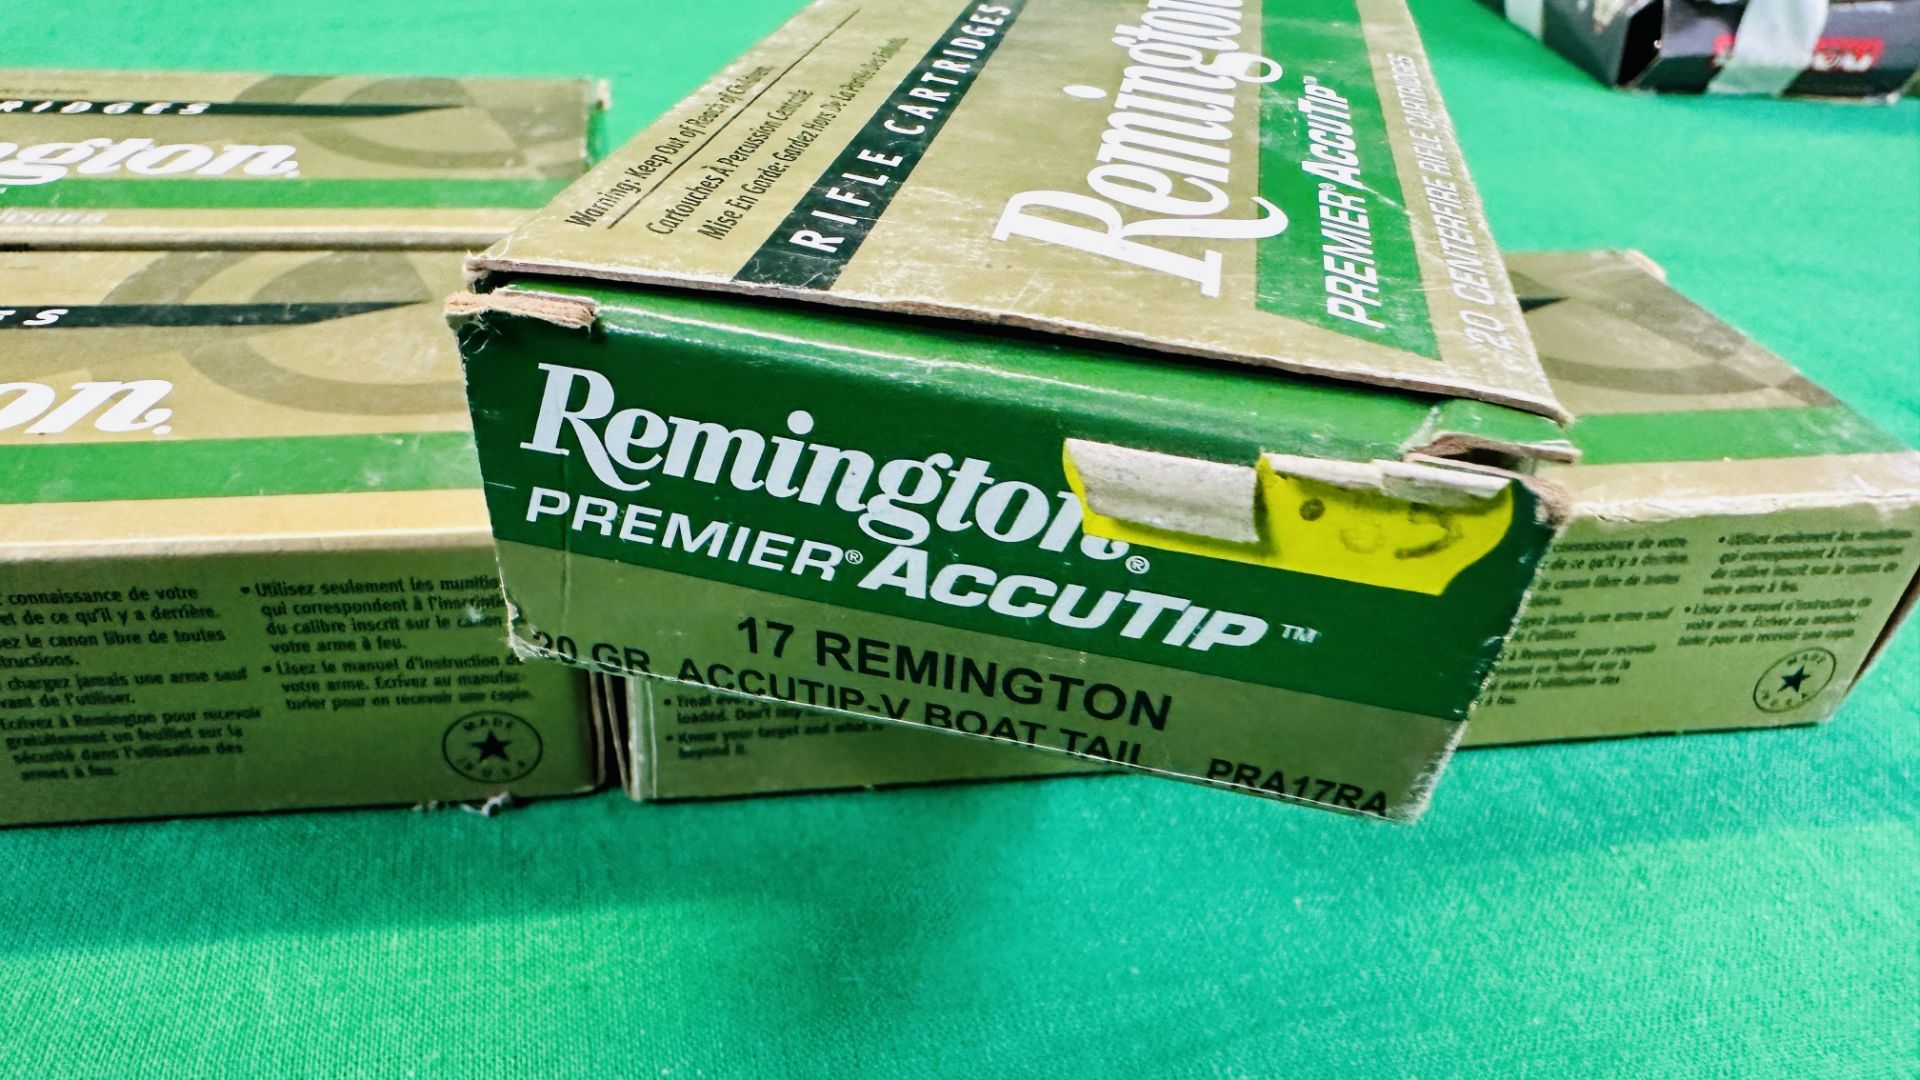 80 X REMINGTON 17 PREMIER ACCUTIP 20 GR RIFLE AMMUNITION - (REF: 1431) - (TO BE COLLECTED IN PERSON - Image 4 of 4